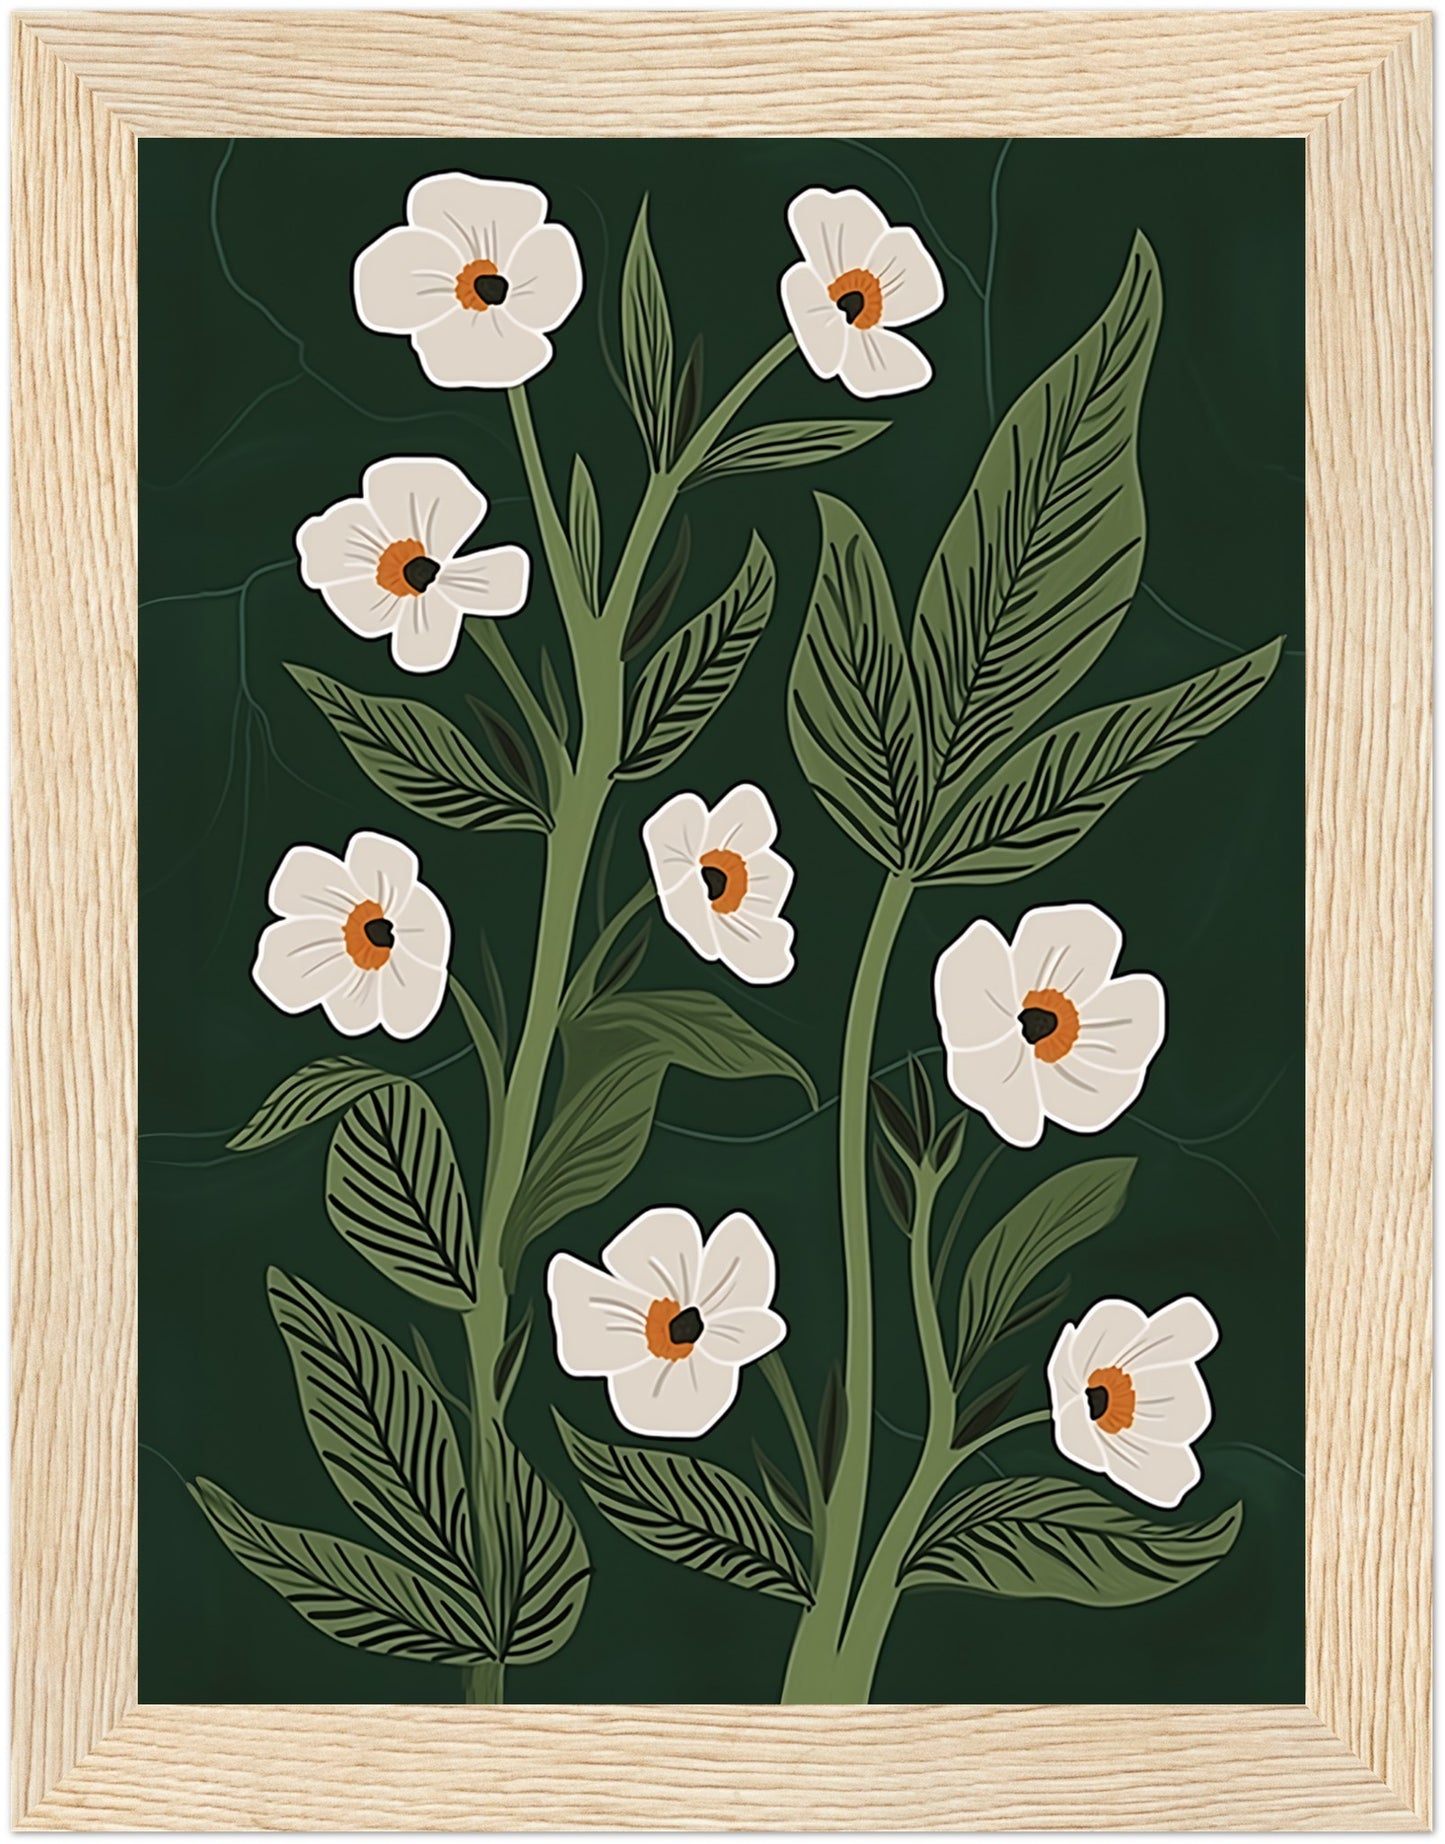 Illustration of white flowers with green leaves on a dark background, framed by a wooden border.